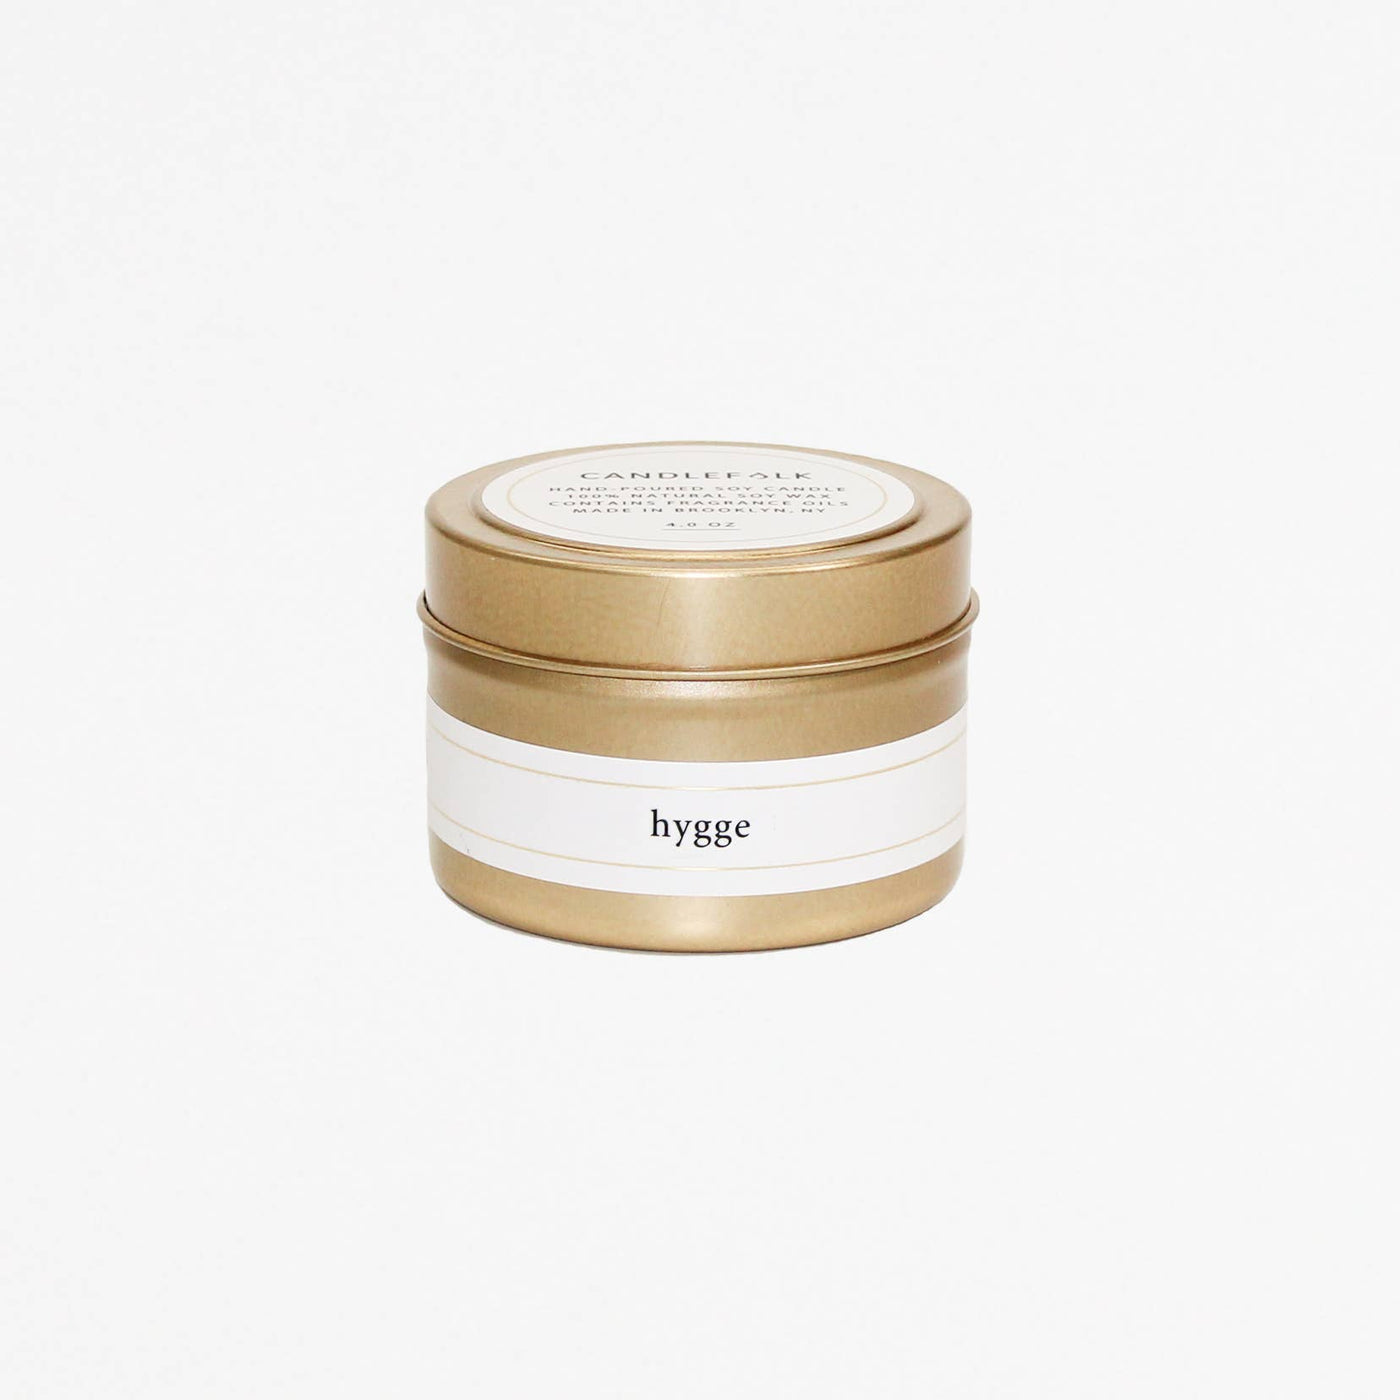 Hygge Travel Candle